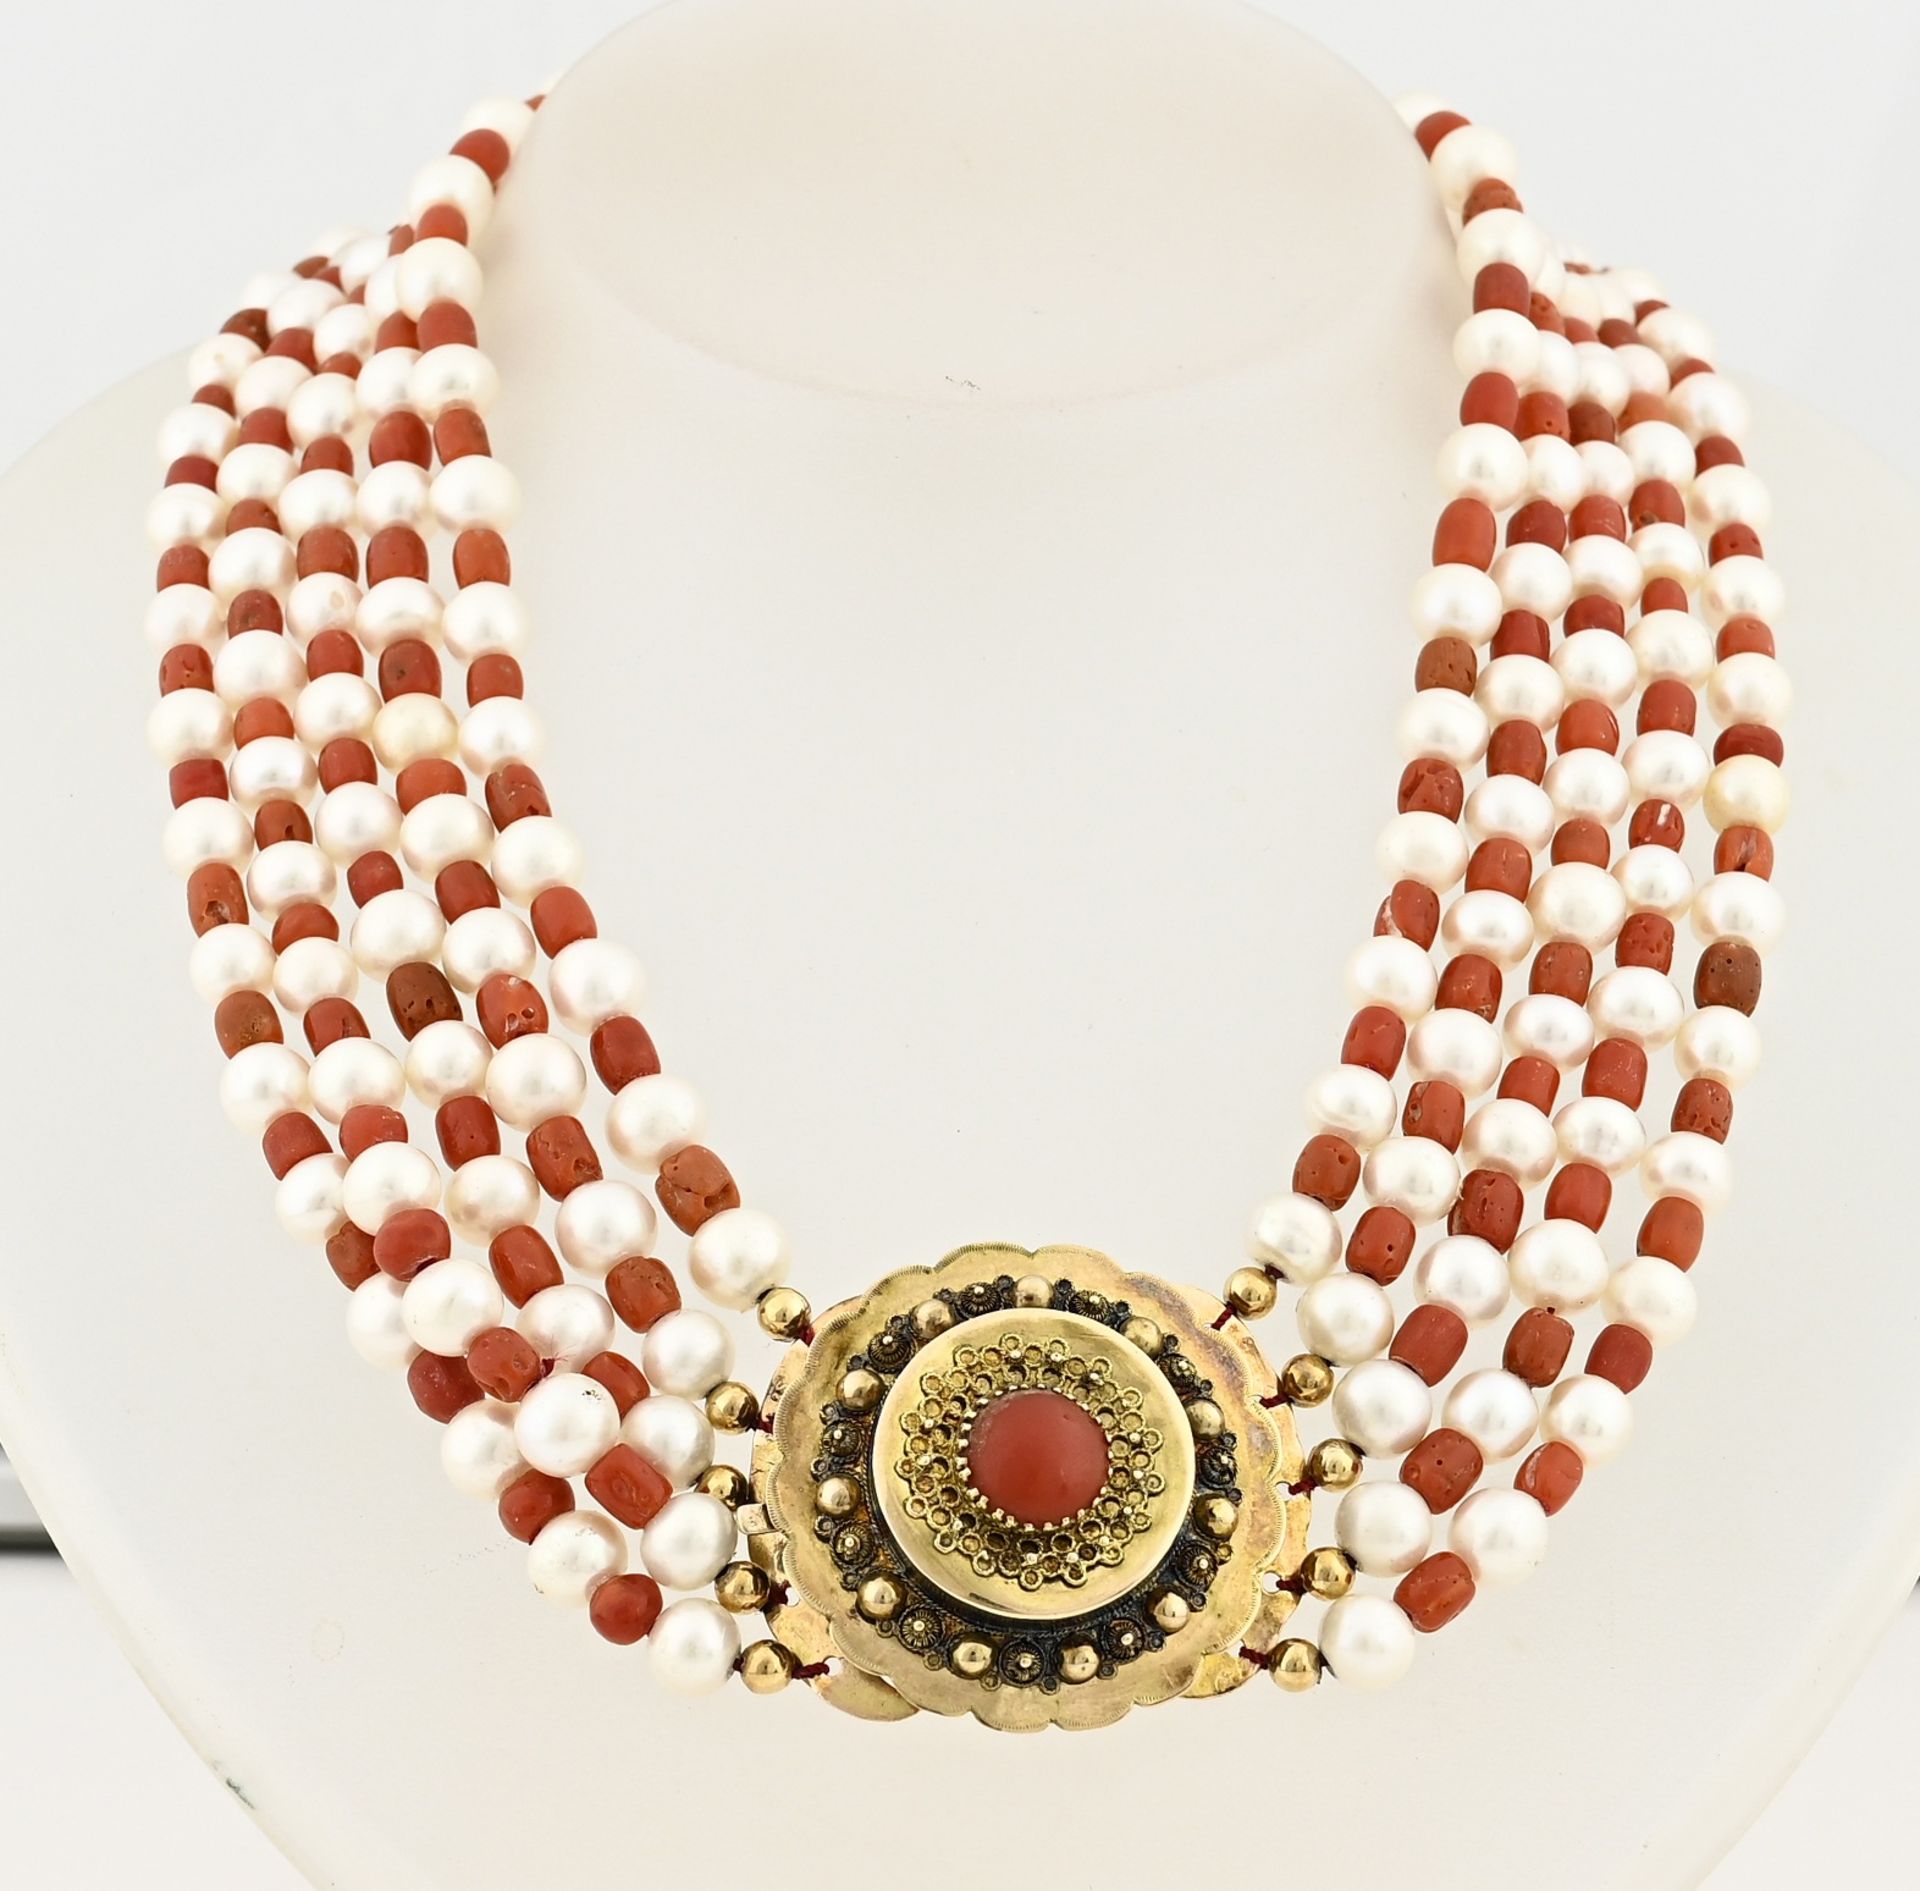 Necklace of red coral and pearl with gold regional clasp